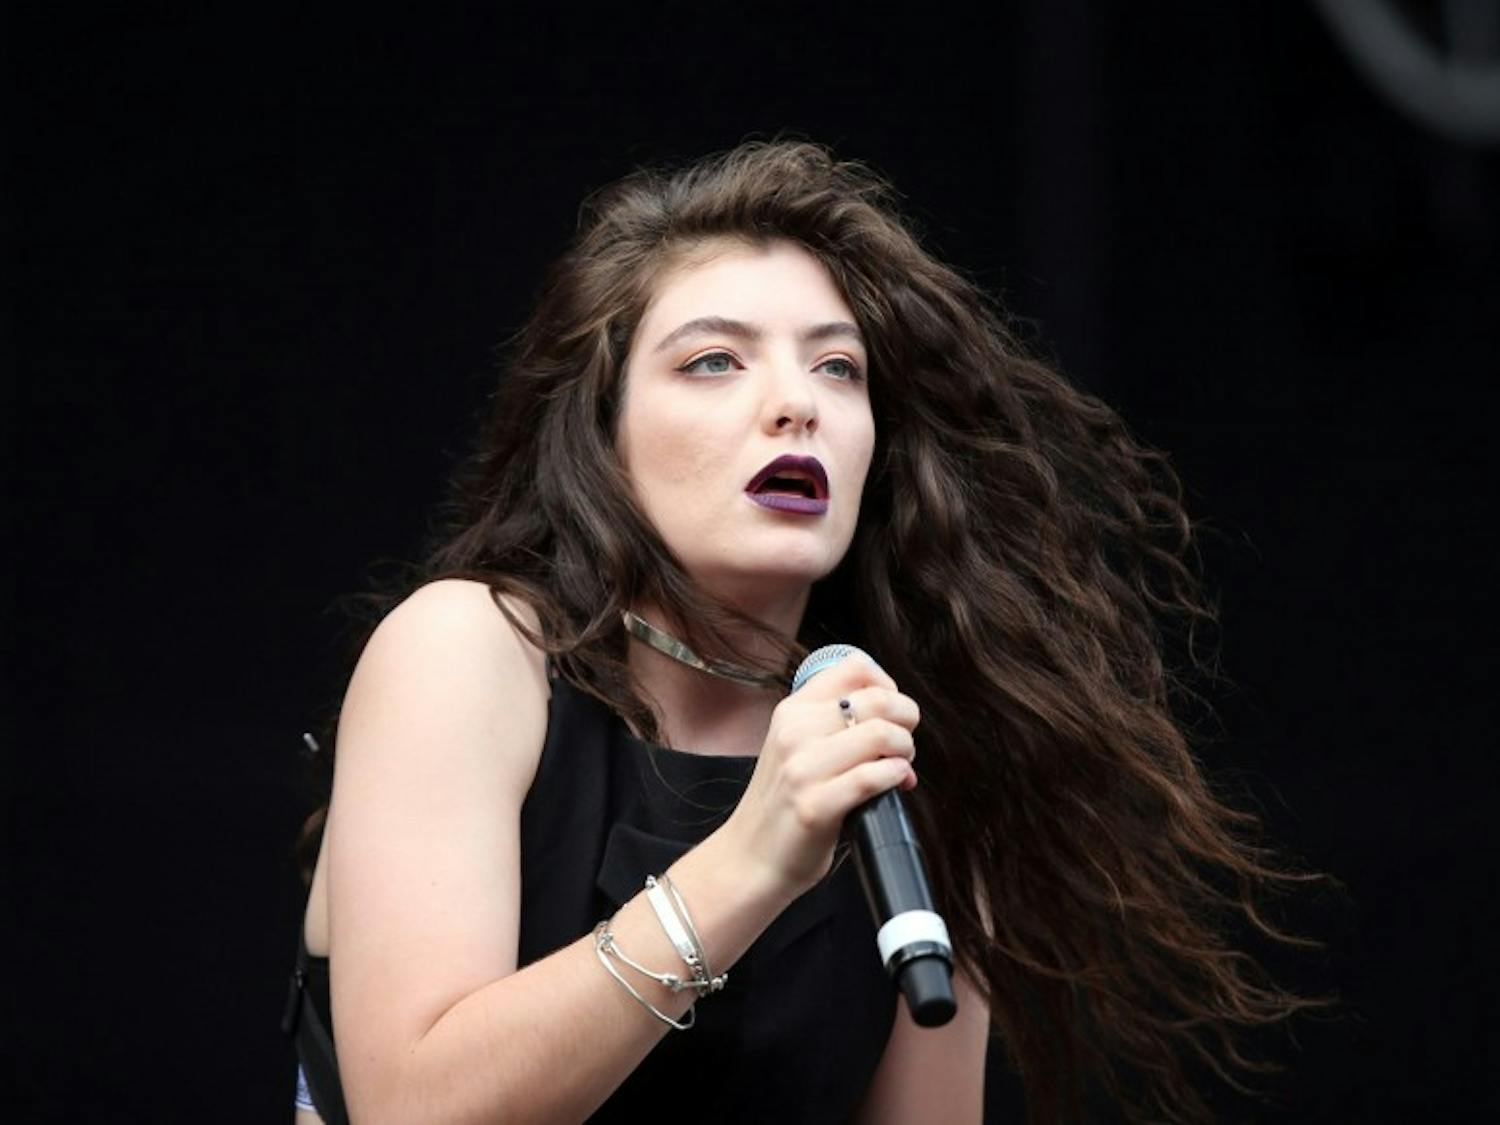 Lorde performs Friday, Aug. 1, 2014, at Lollapalooza in Chicago's Grant Park. (Brian Cassella/Chicago Tribune/MCT)